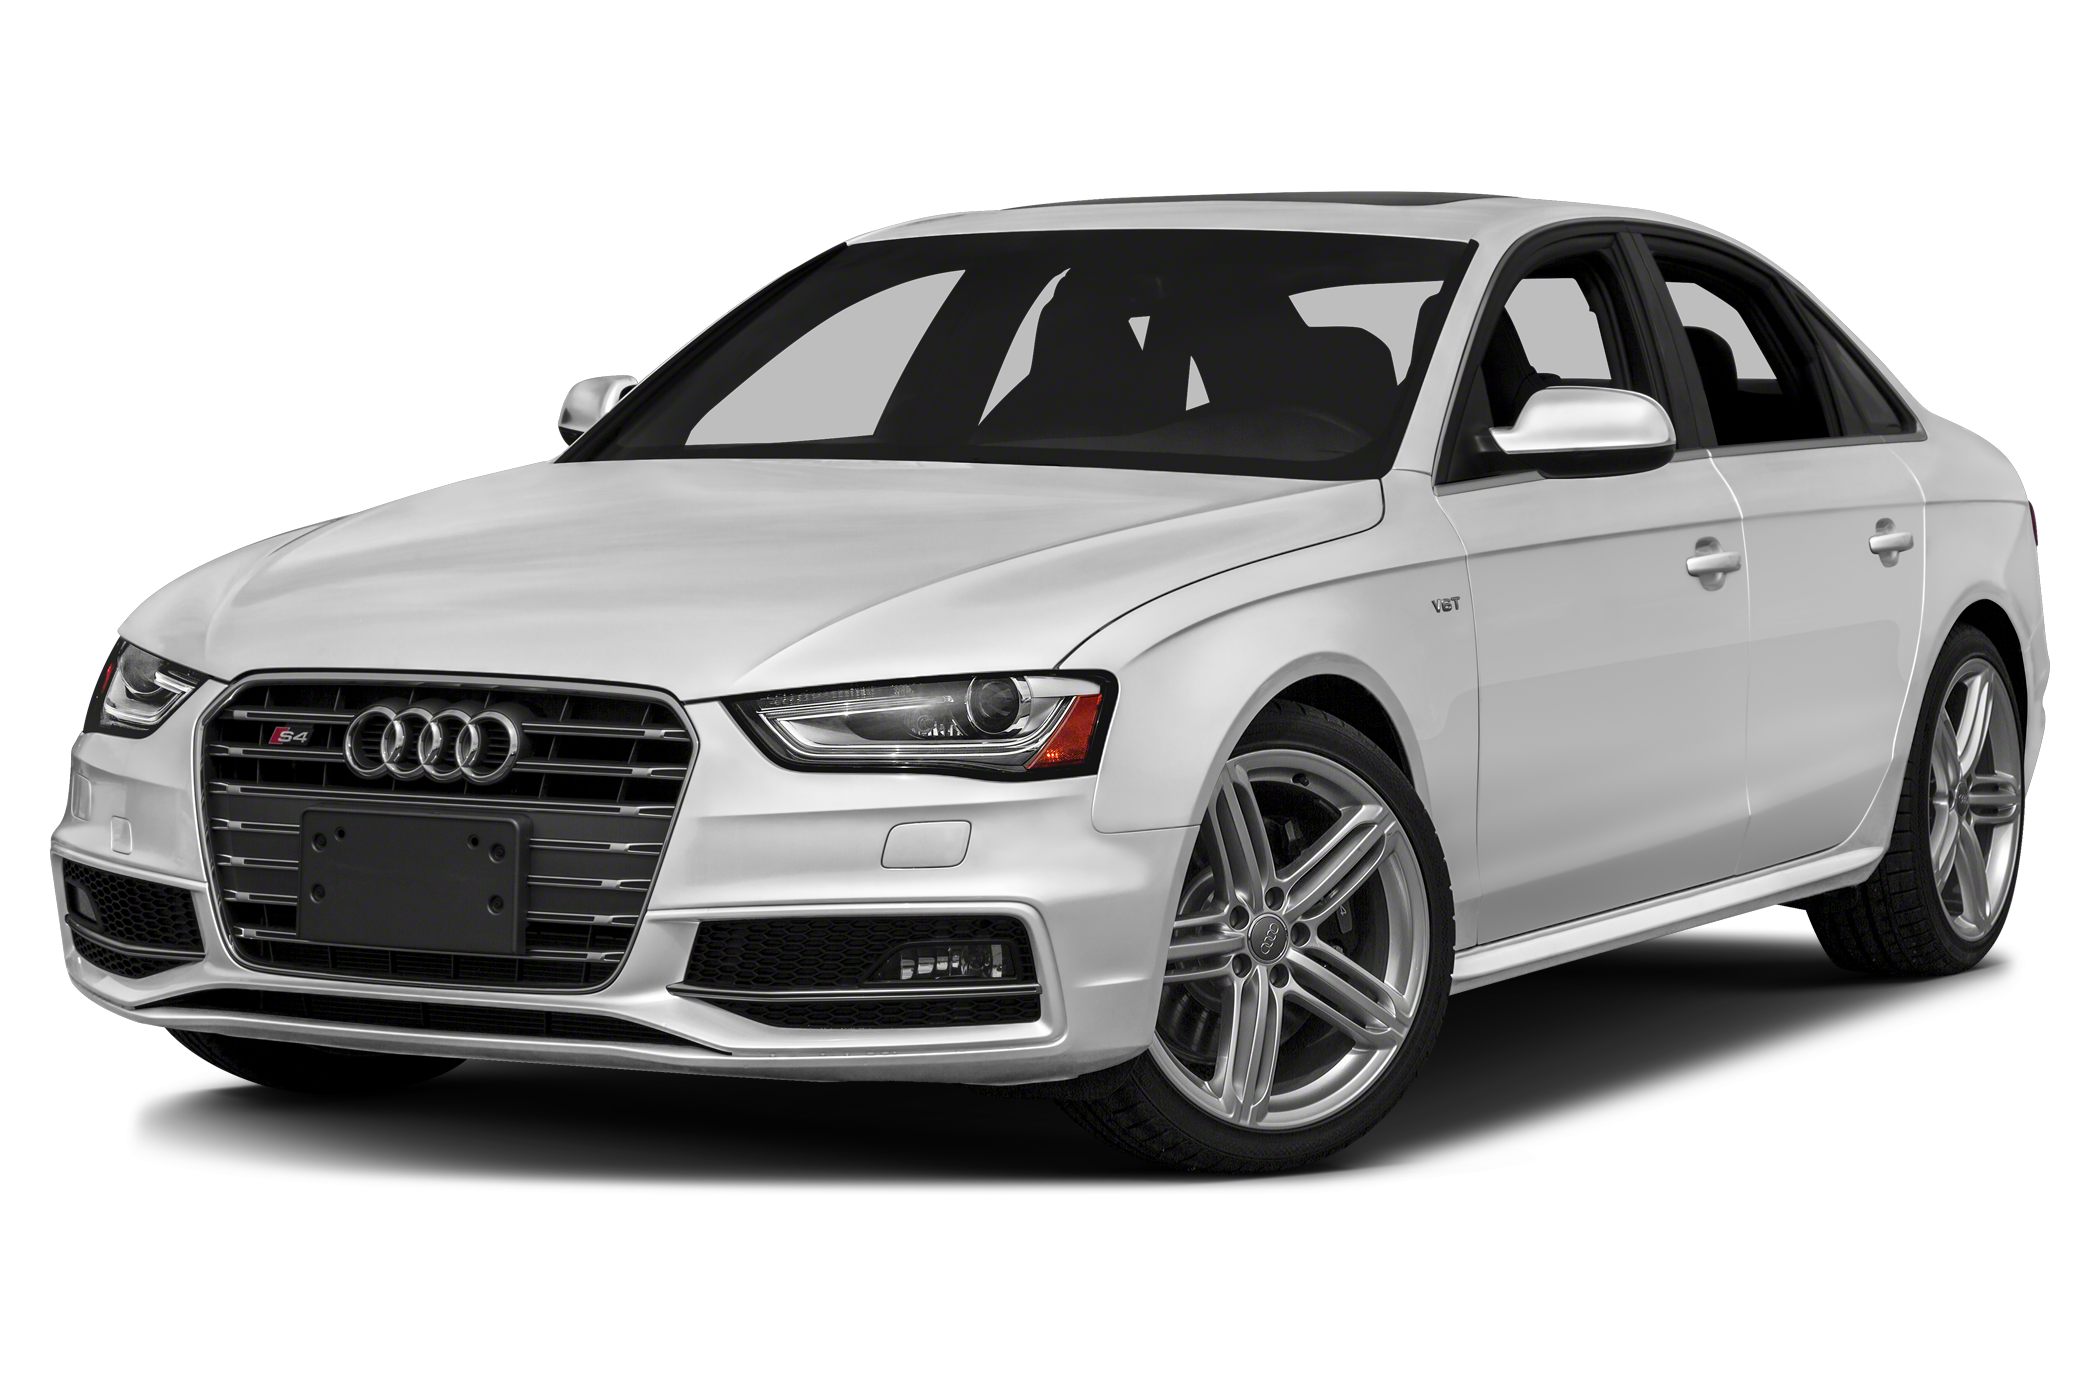 Amazing Audi S4 Pictures & Backgrounds